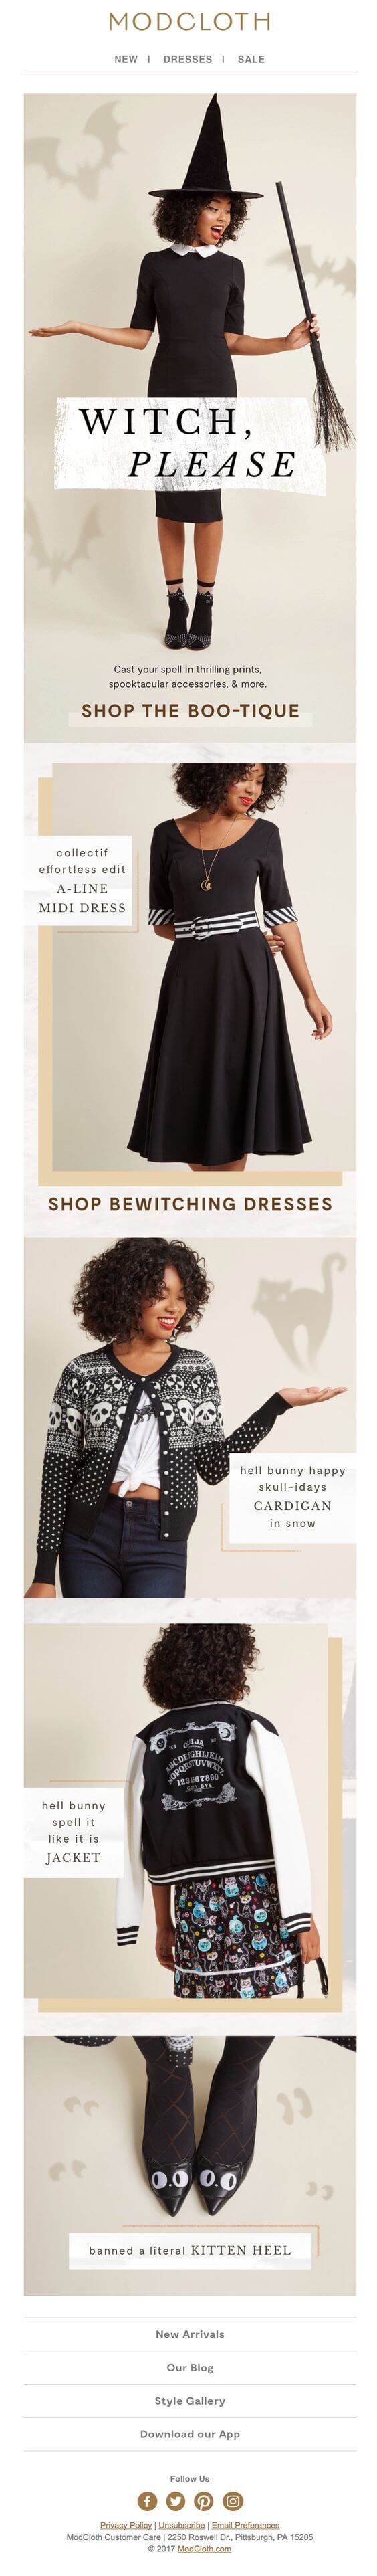 Modcloth-Halloween-Email